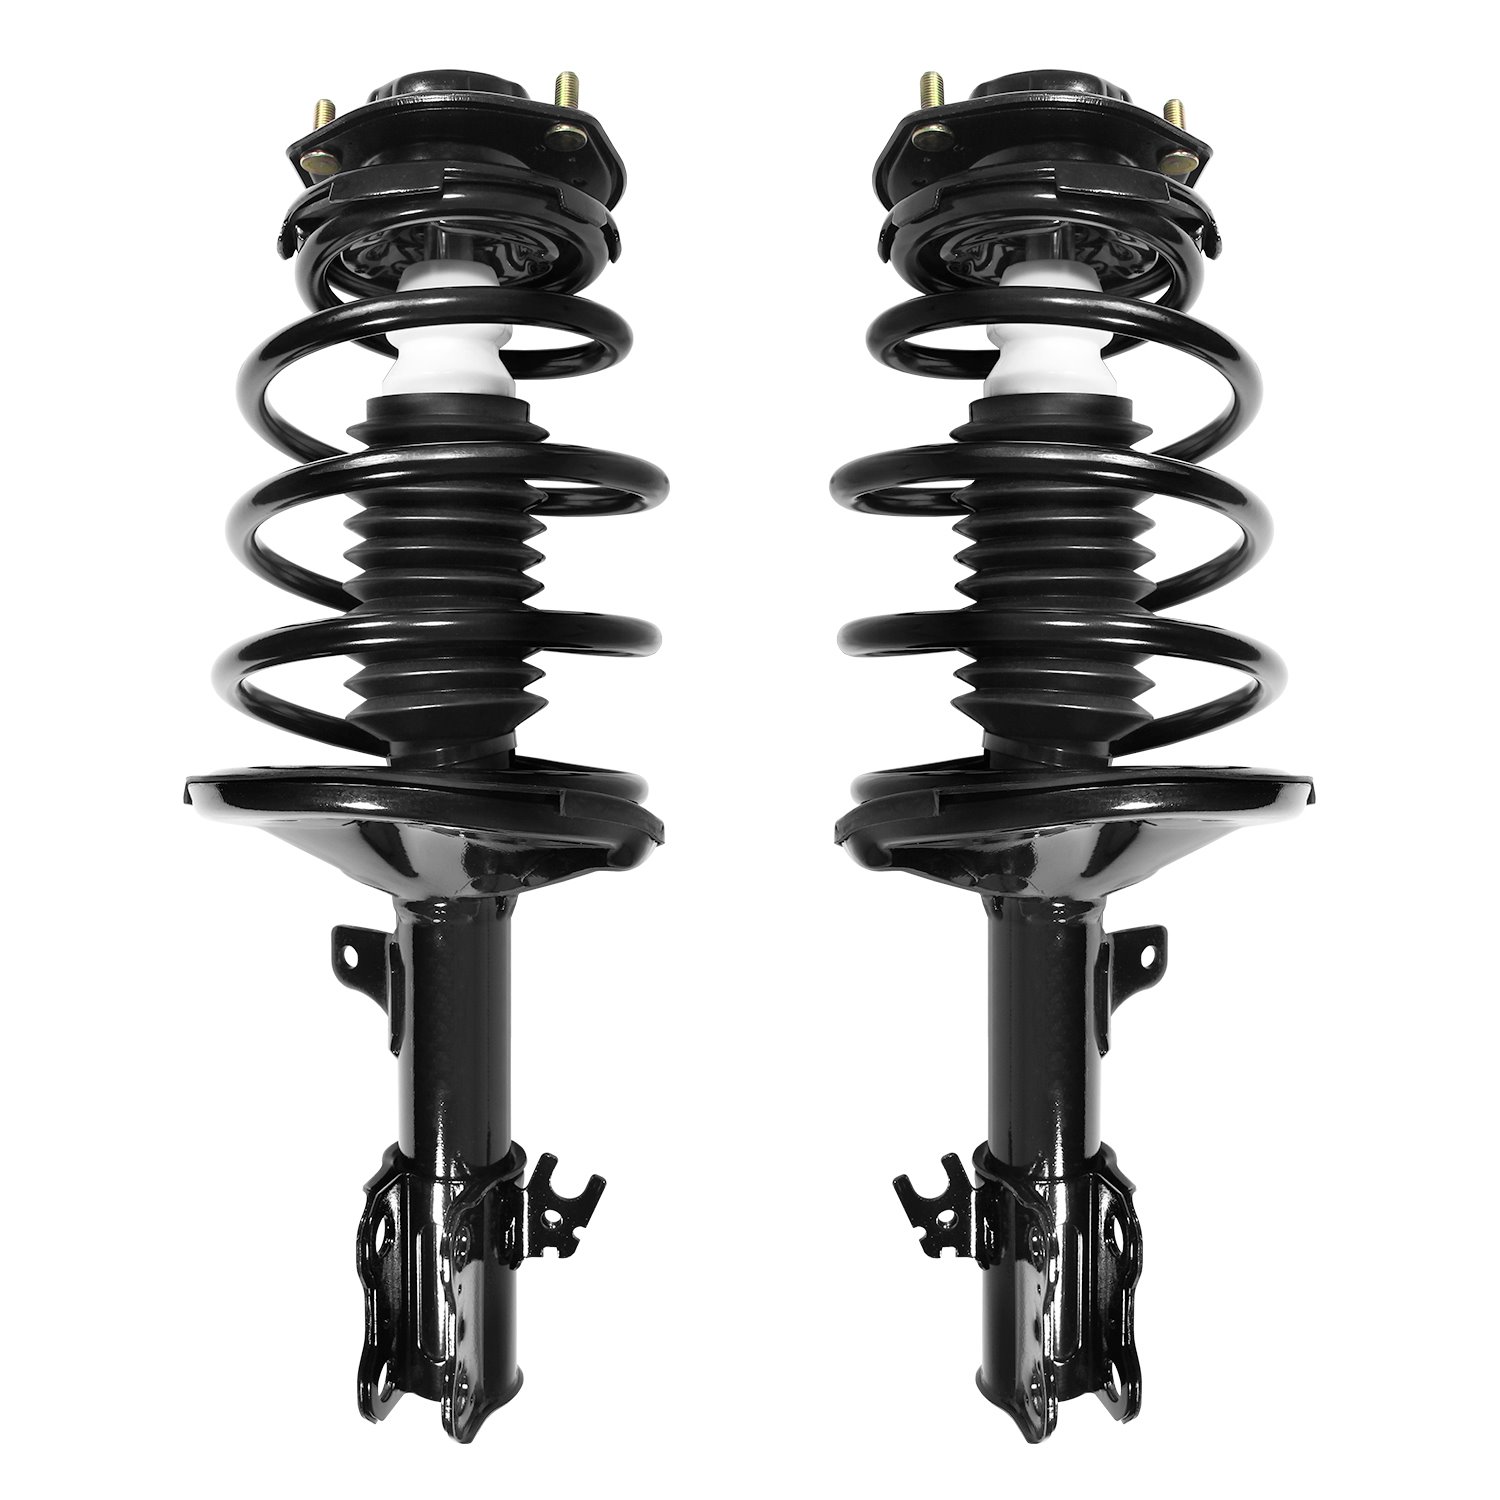 2-11181-11182-001 Suspension Strut & Coil Spring Assembly Set Fits Select Toyota Camry, Toyota Solara